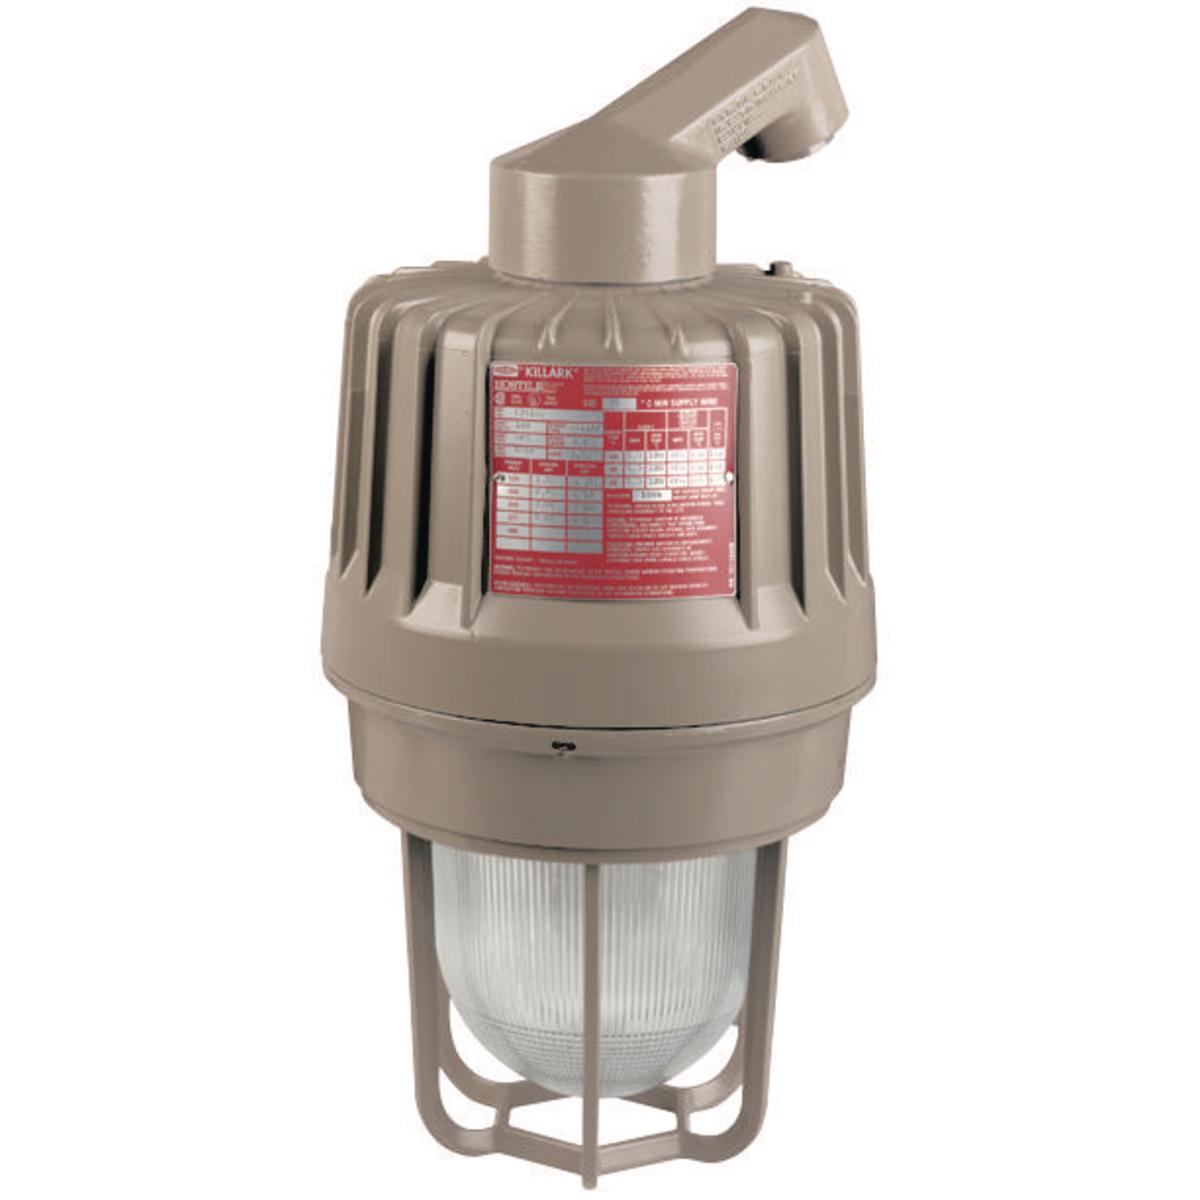 Hubbell EZS405D5G HID 400W 480V High Pressure Sodium 1-1/2"Stanchion Mount with Guard  ; Three light sources – High Pressure Sodium (50-400W), Metal Halide (70-400W) and Pulse Start Metal Halide (175-400W) ; Mounting choice –Pendant, ceiling, 25˚ stanchion or 90˚ wall moun